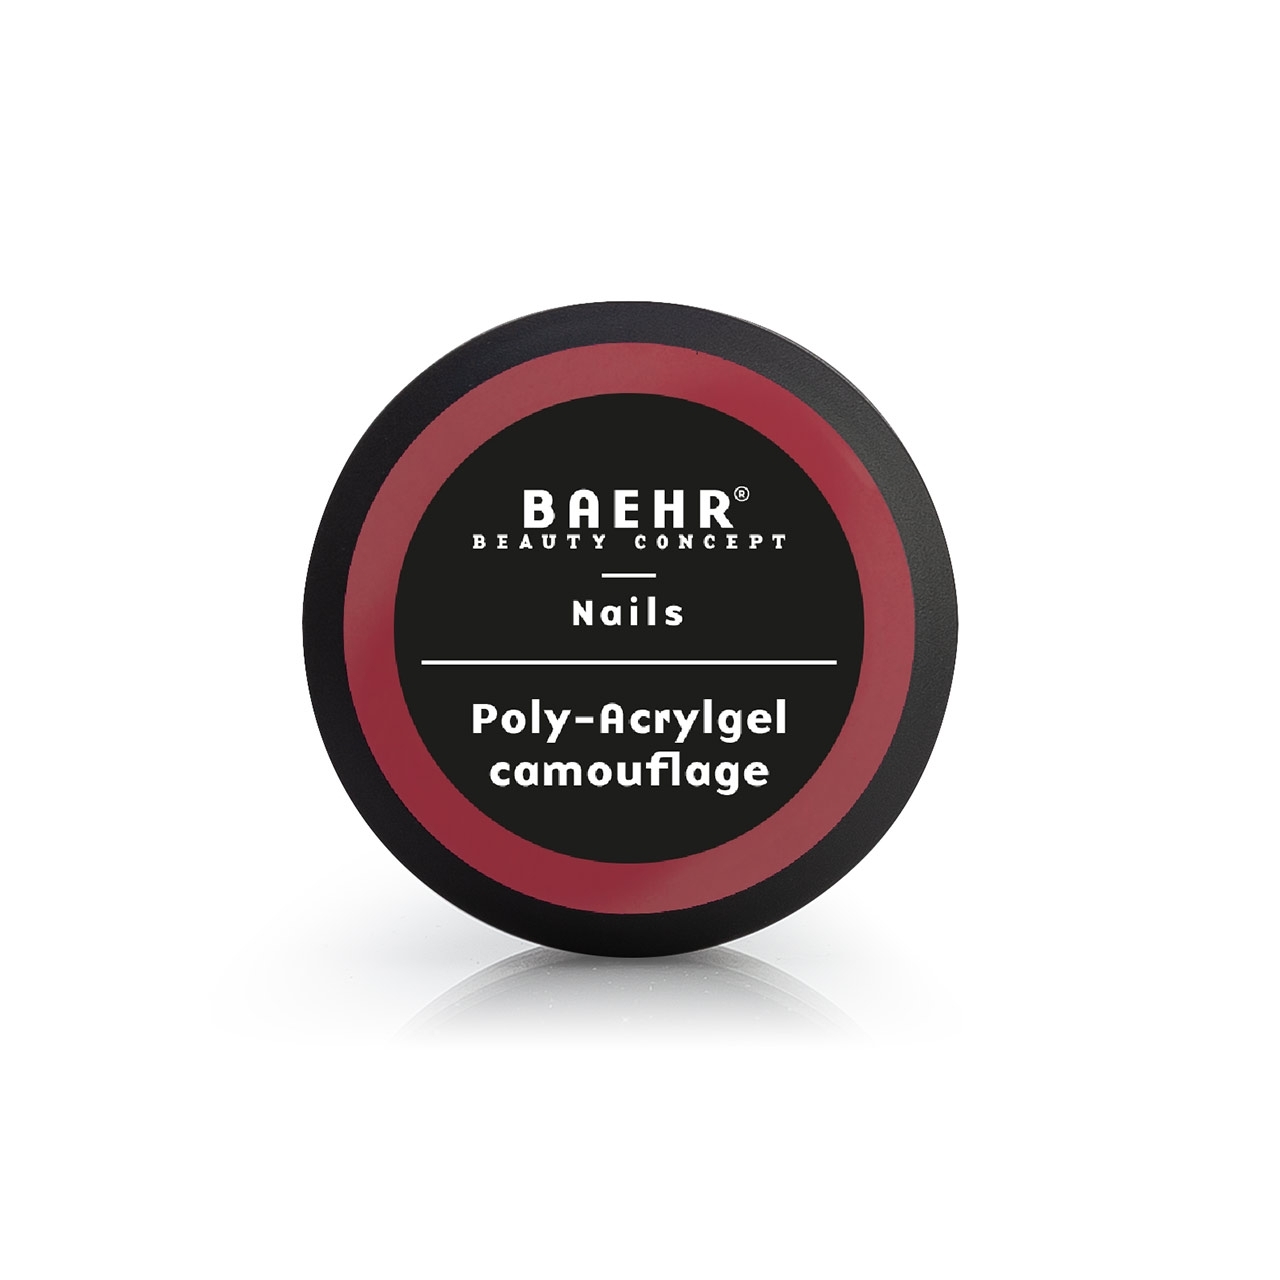 BAEHR BEAUTY CONCEPT - NAILS Poly-Acrylgel camouflage 30 ml